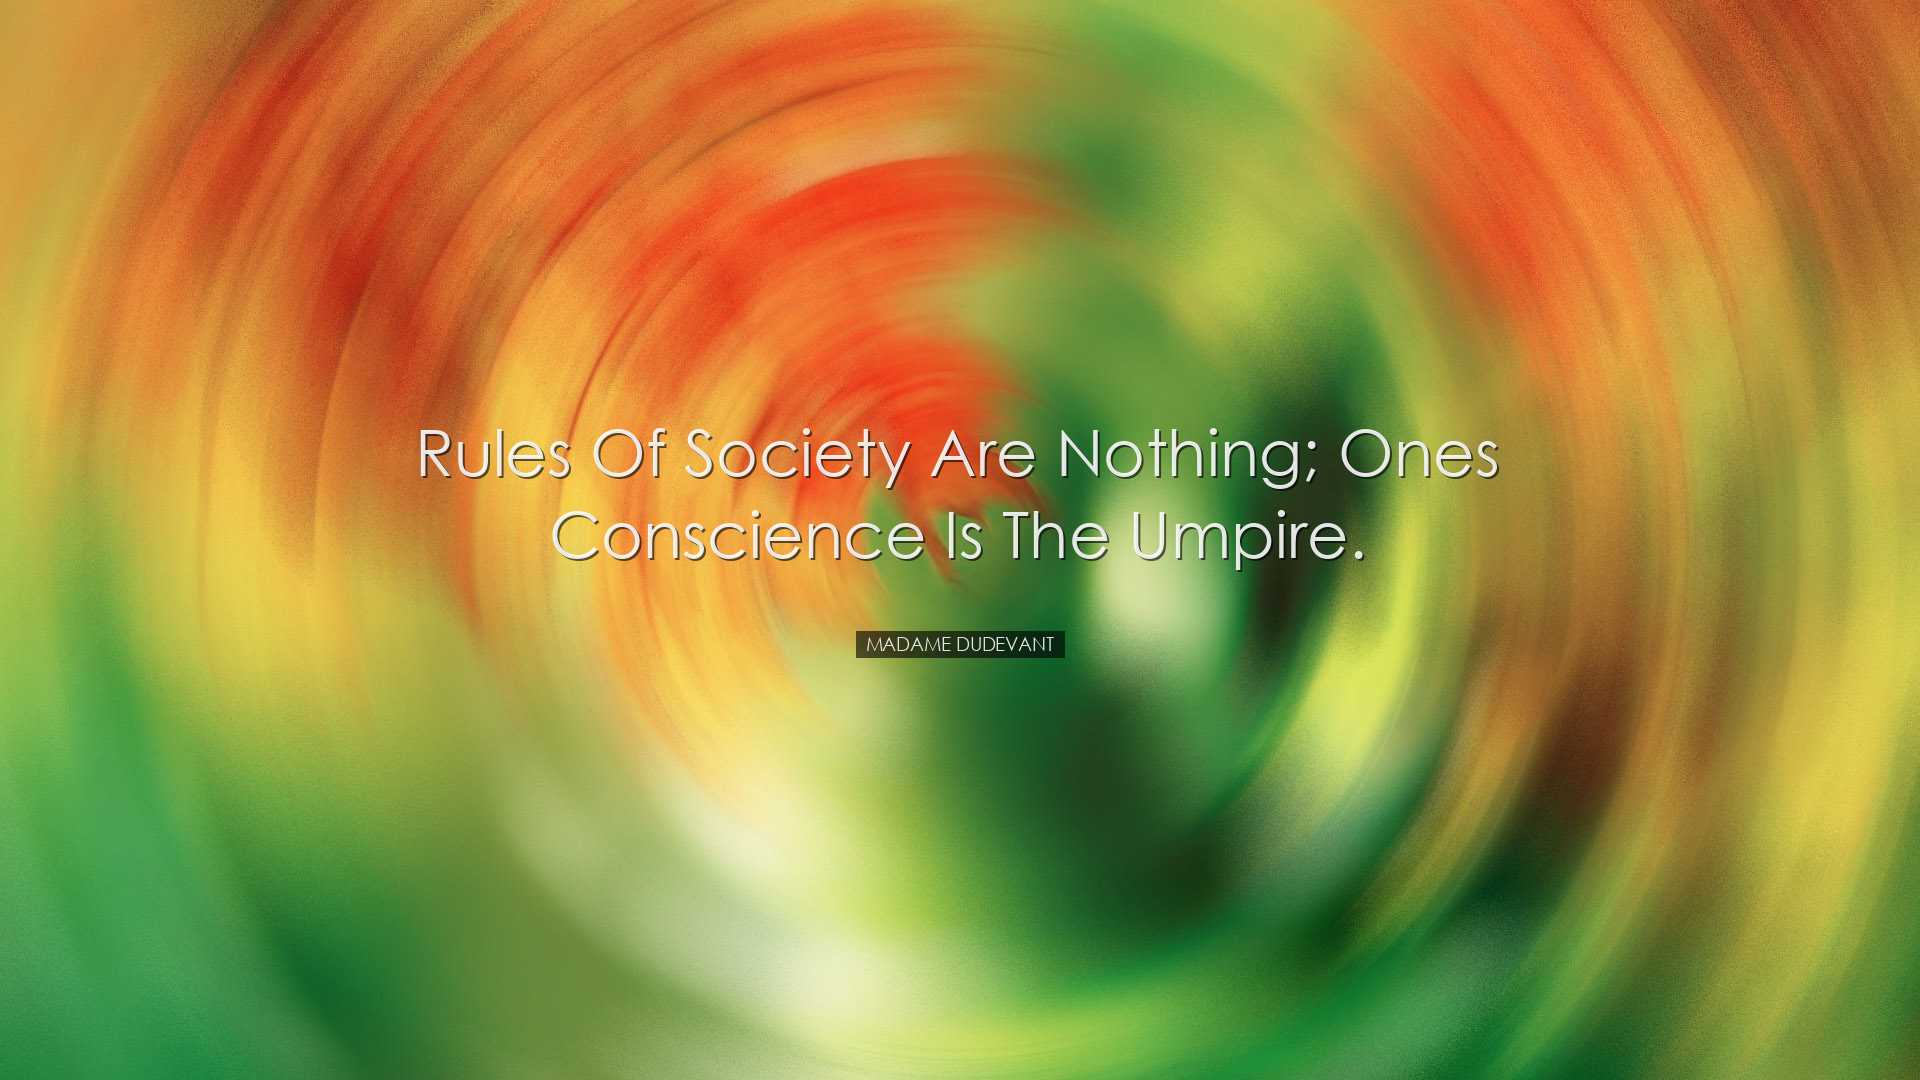 Rules of society are nothing; ones conscience is the umpire. - Mad